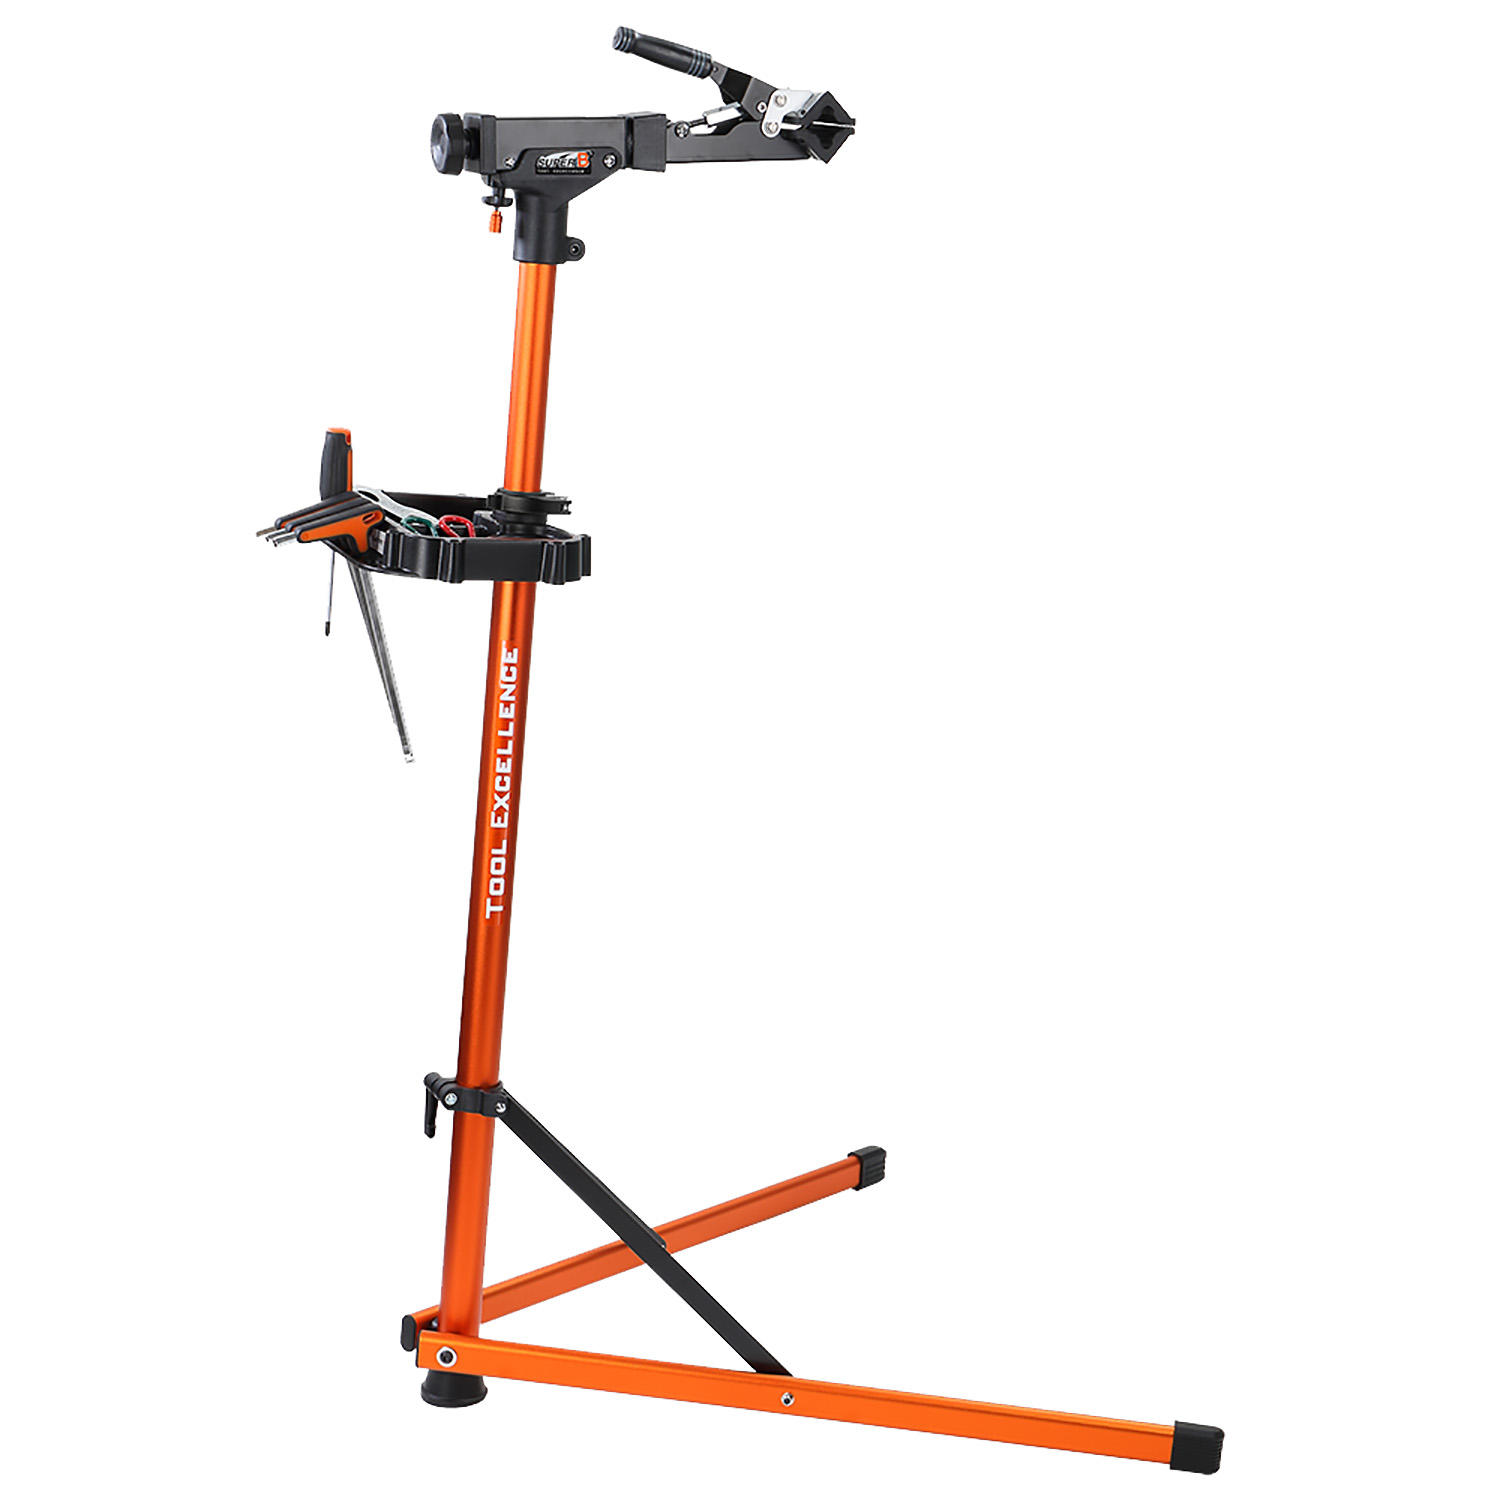 881040 SUPER B TB-WS20 Top Assist assembly stand – AVAILABLE IN SELECTED BIKE SHOPS